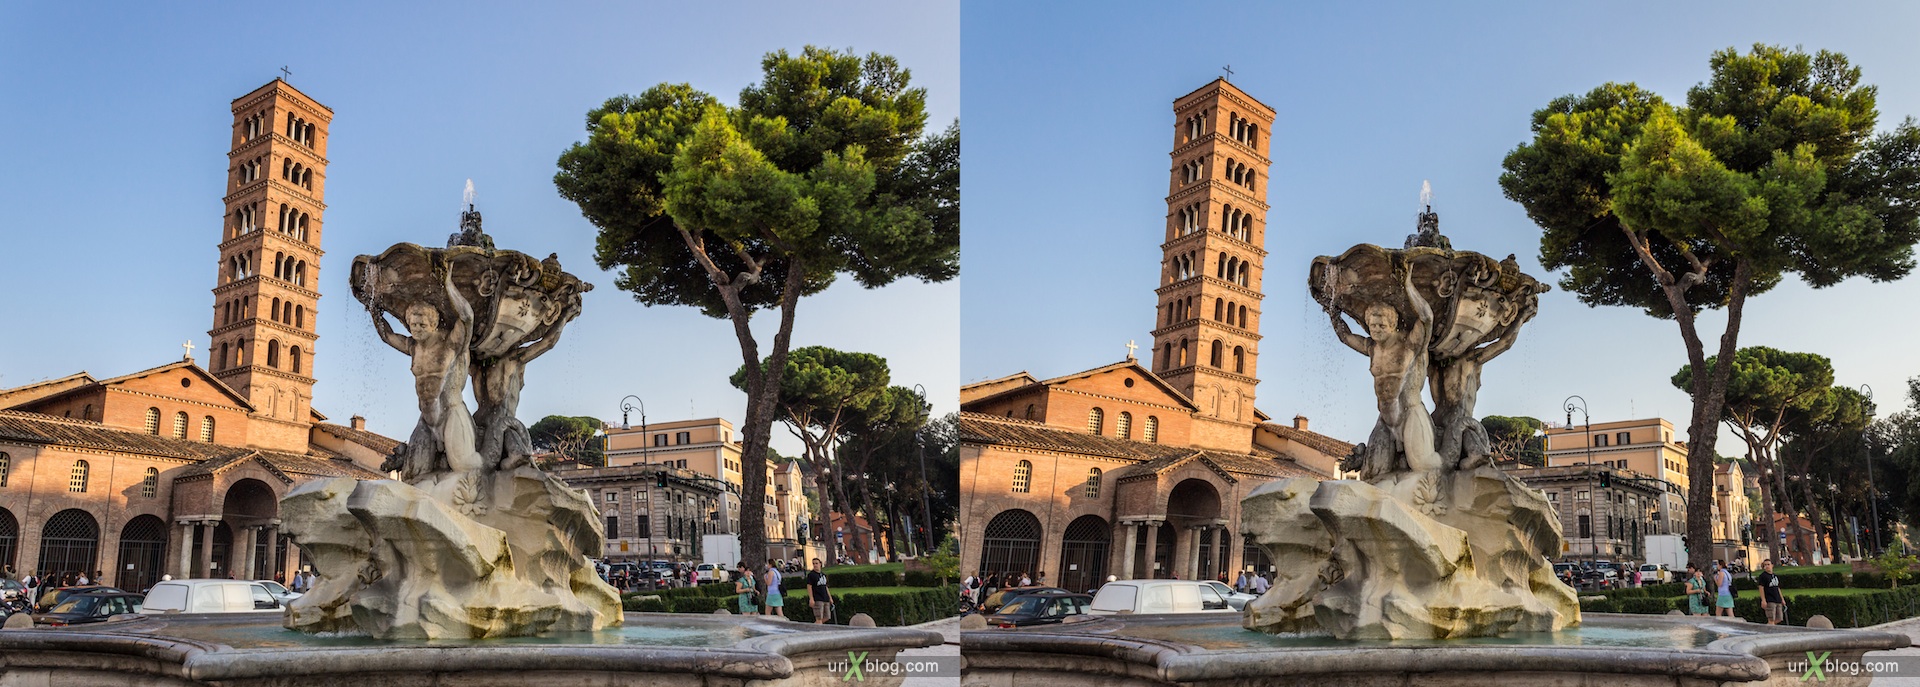 2012, fountain of the Tritons, Forum Boarium, Rome, Italy, 3D, stereo pair, cross-eyed, crossview, cross view stereo pair